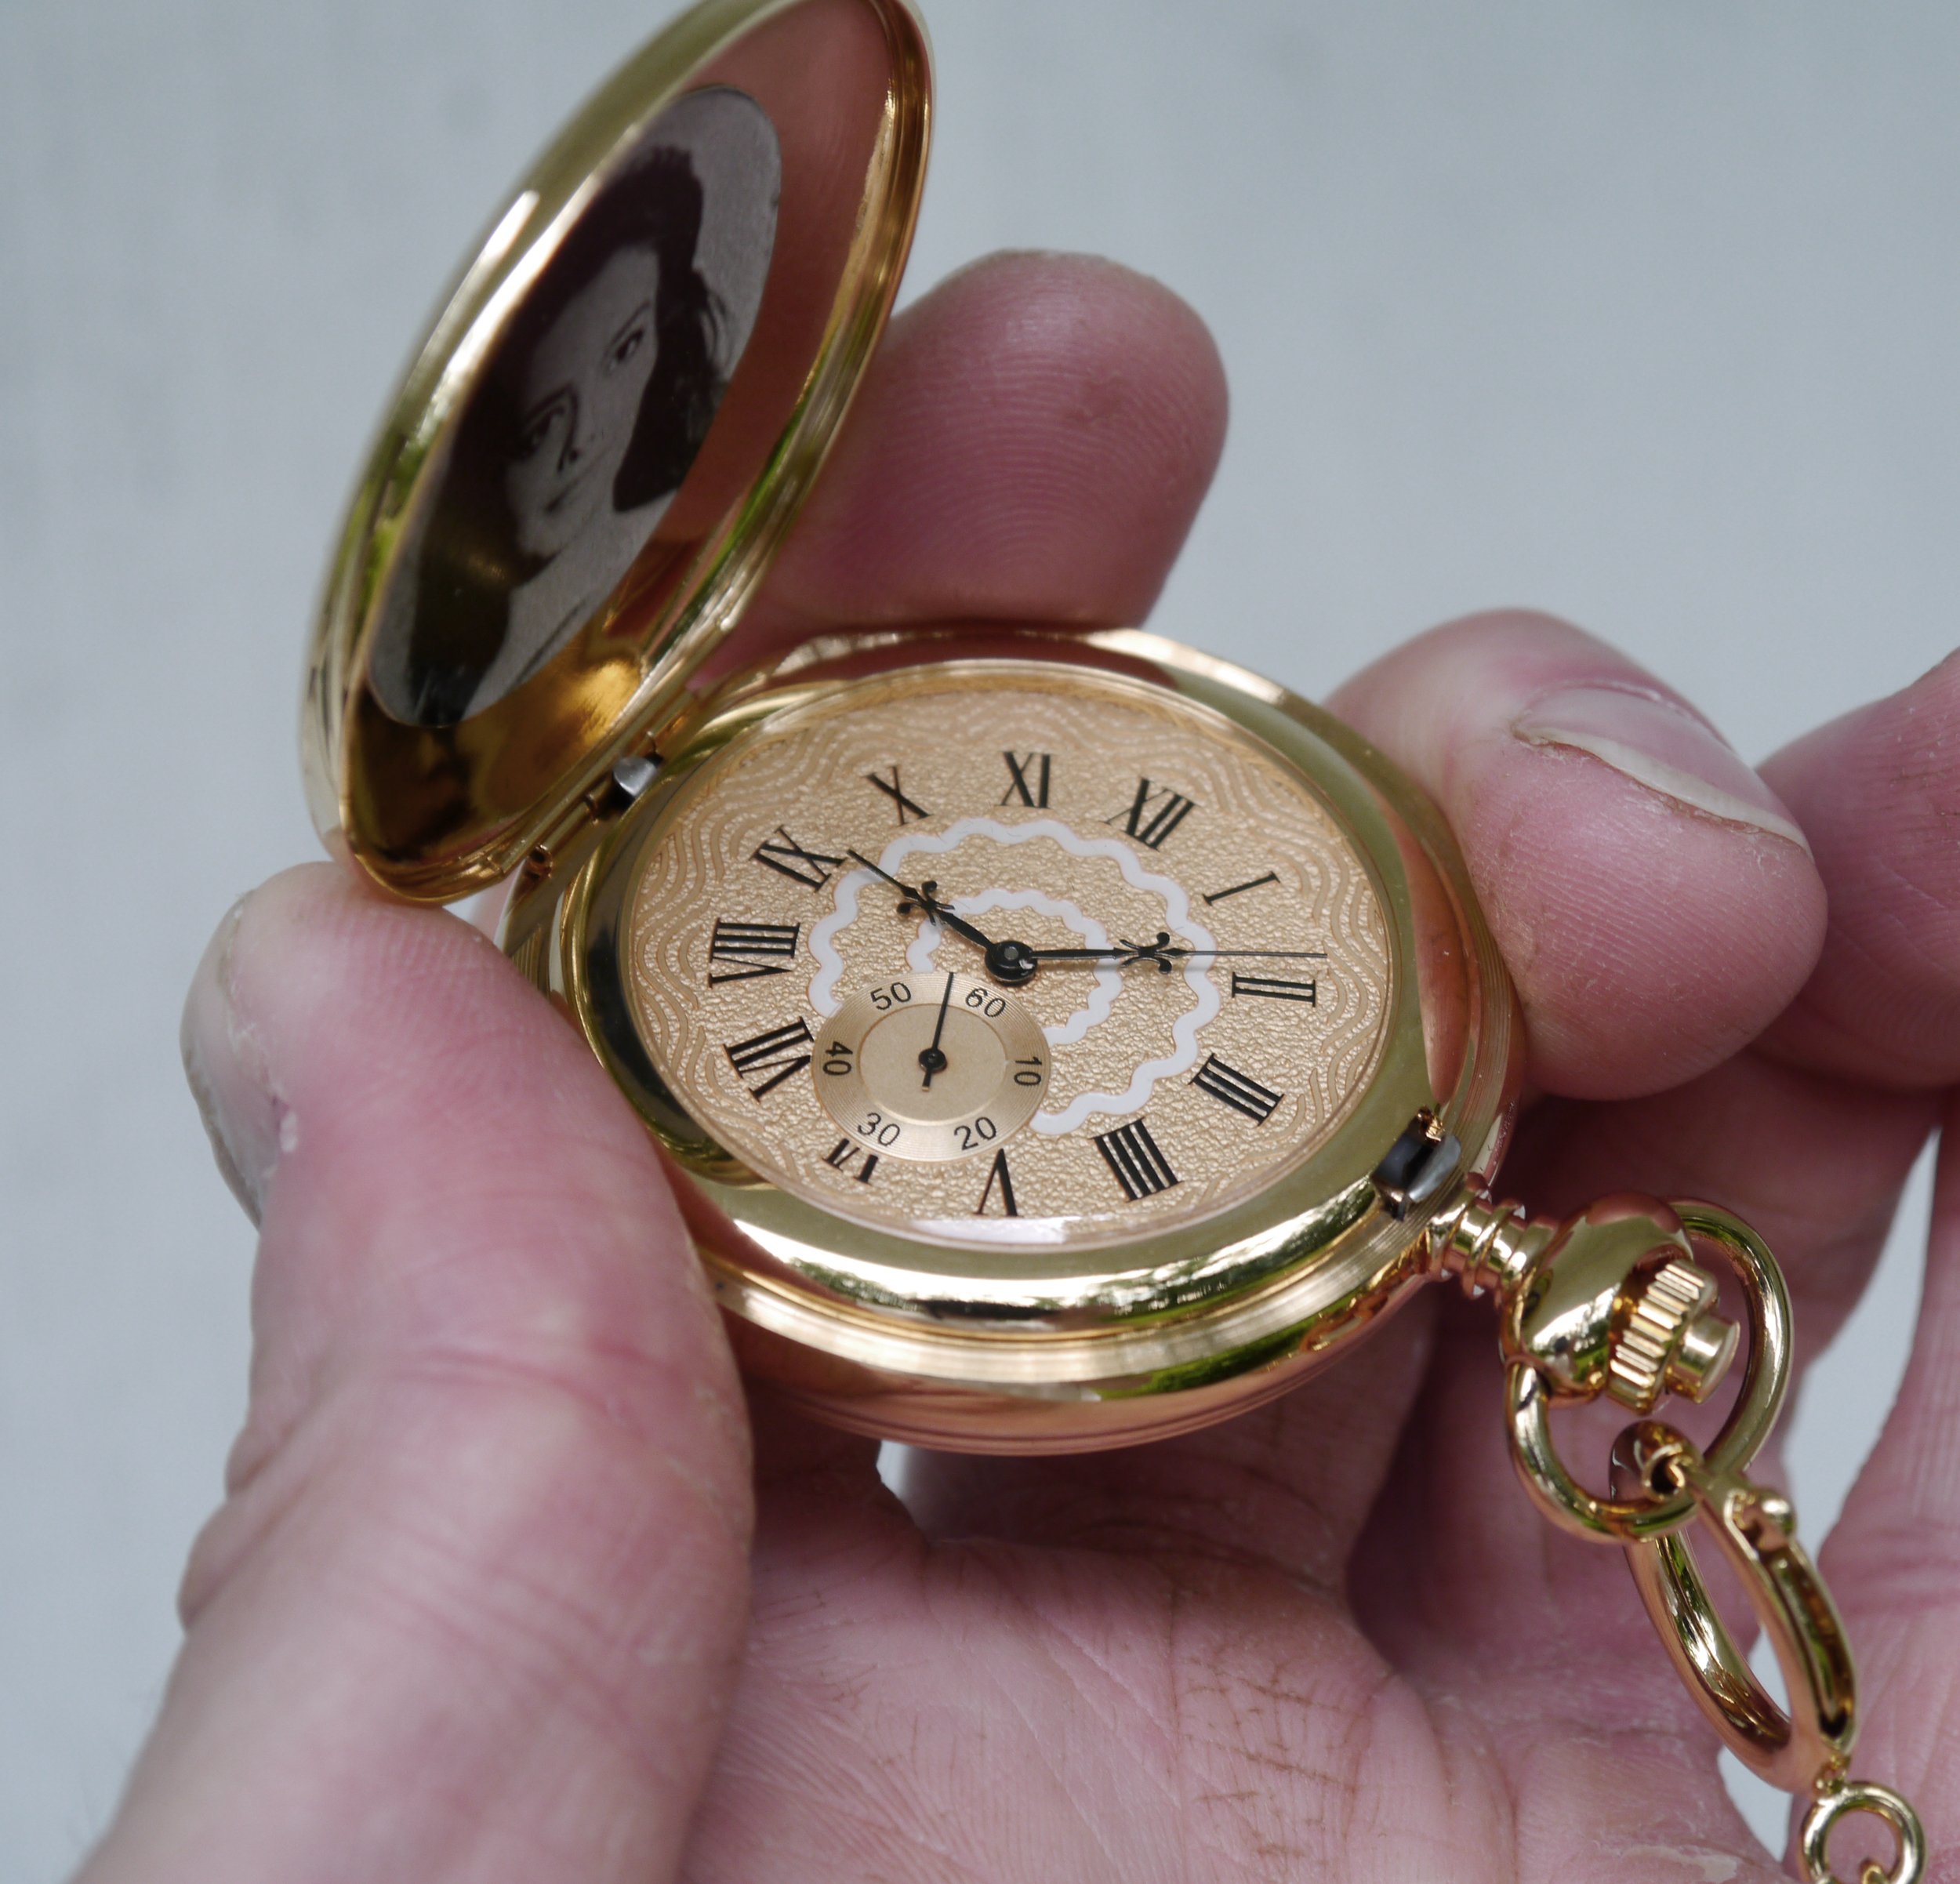 StraightLine Music Pocket Watch Movie Prop from for A Few Dollars More - Clint Eastwood + Lee Van Cleef - Great Gift